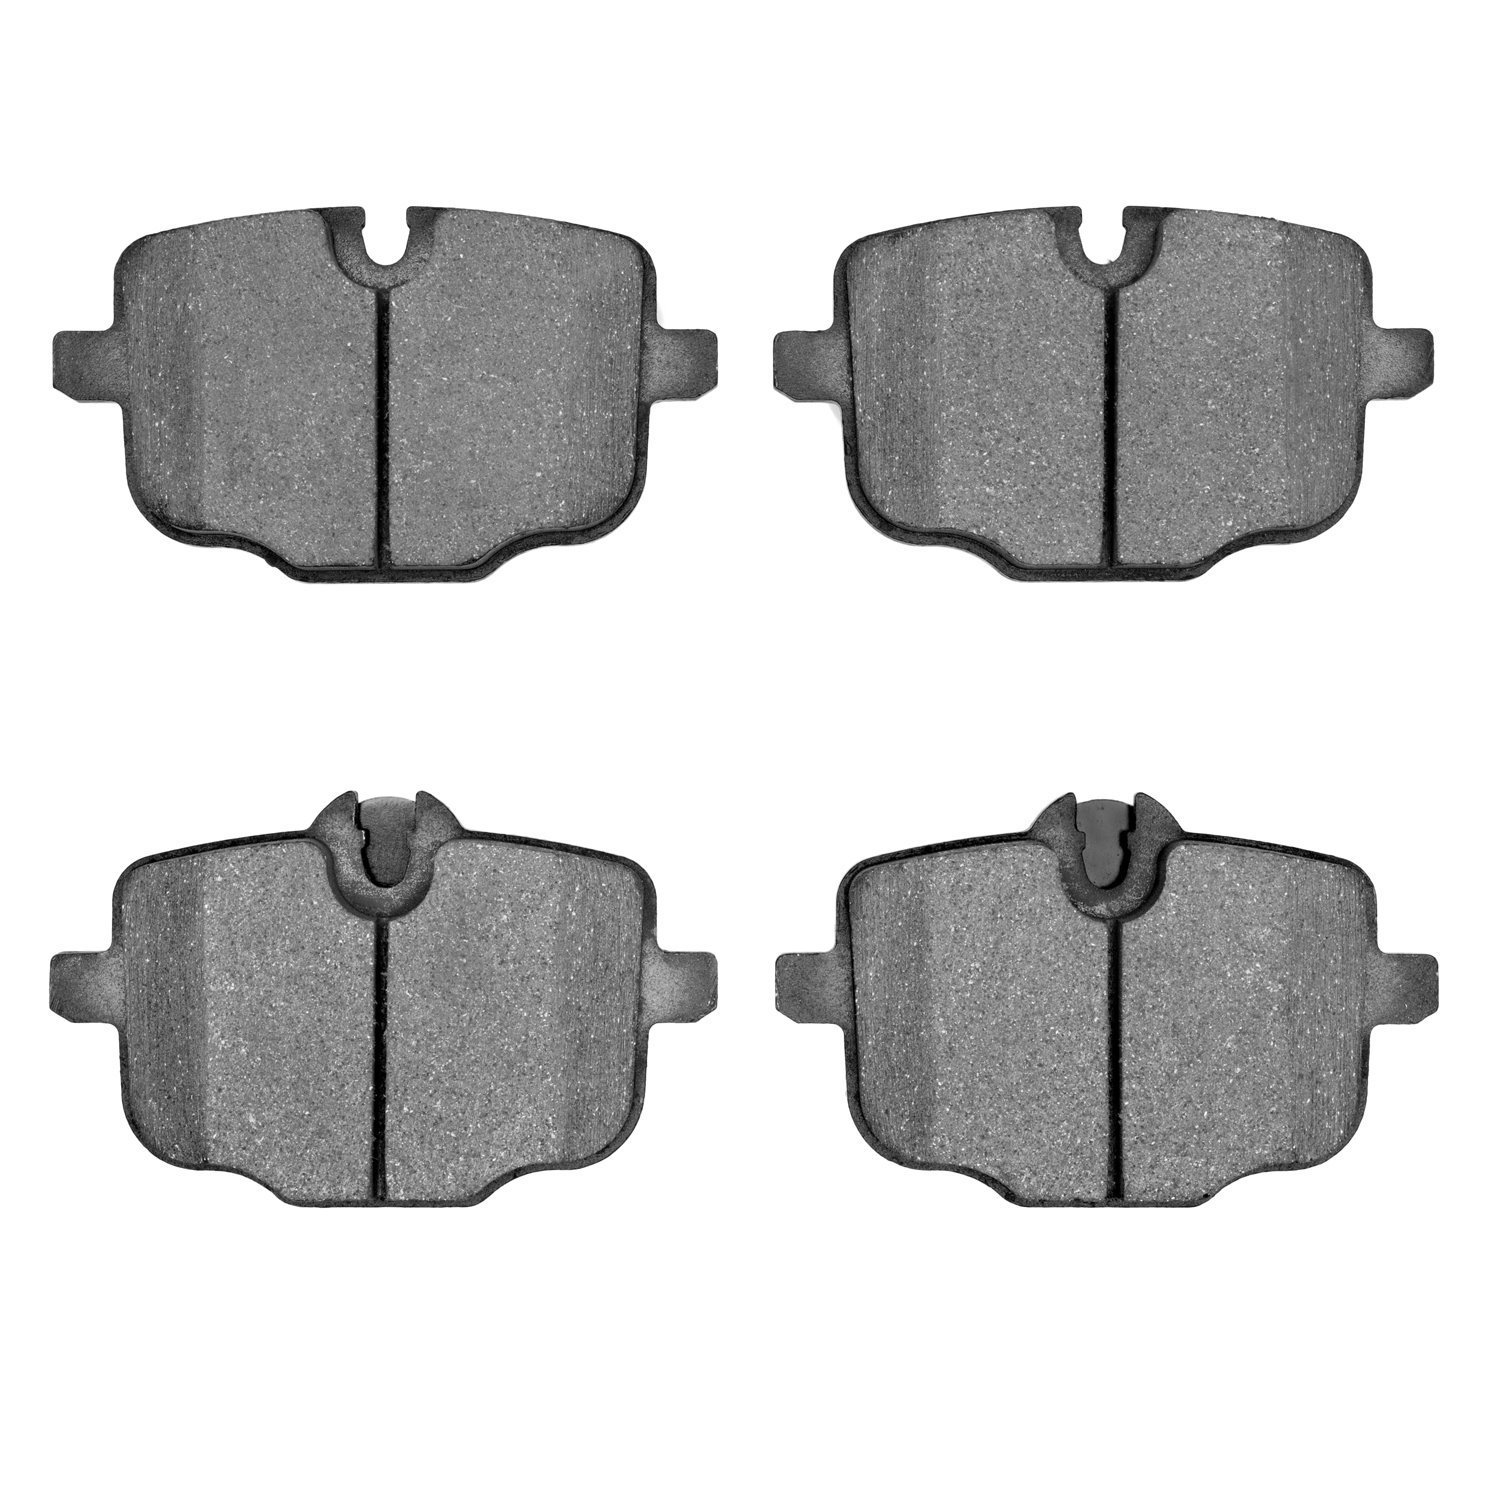 1310-1850-00 3000-Series Ceramic Brake Pads, Fits Select BMW, Position: Rear